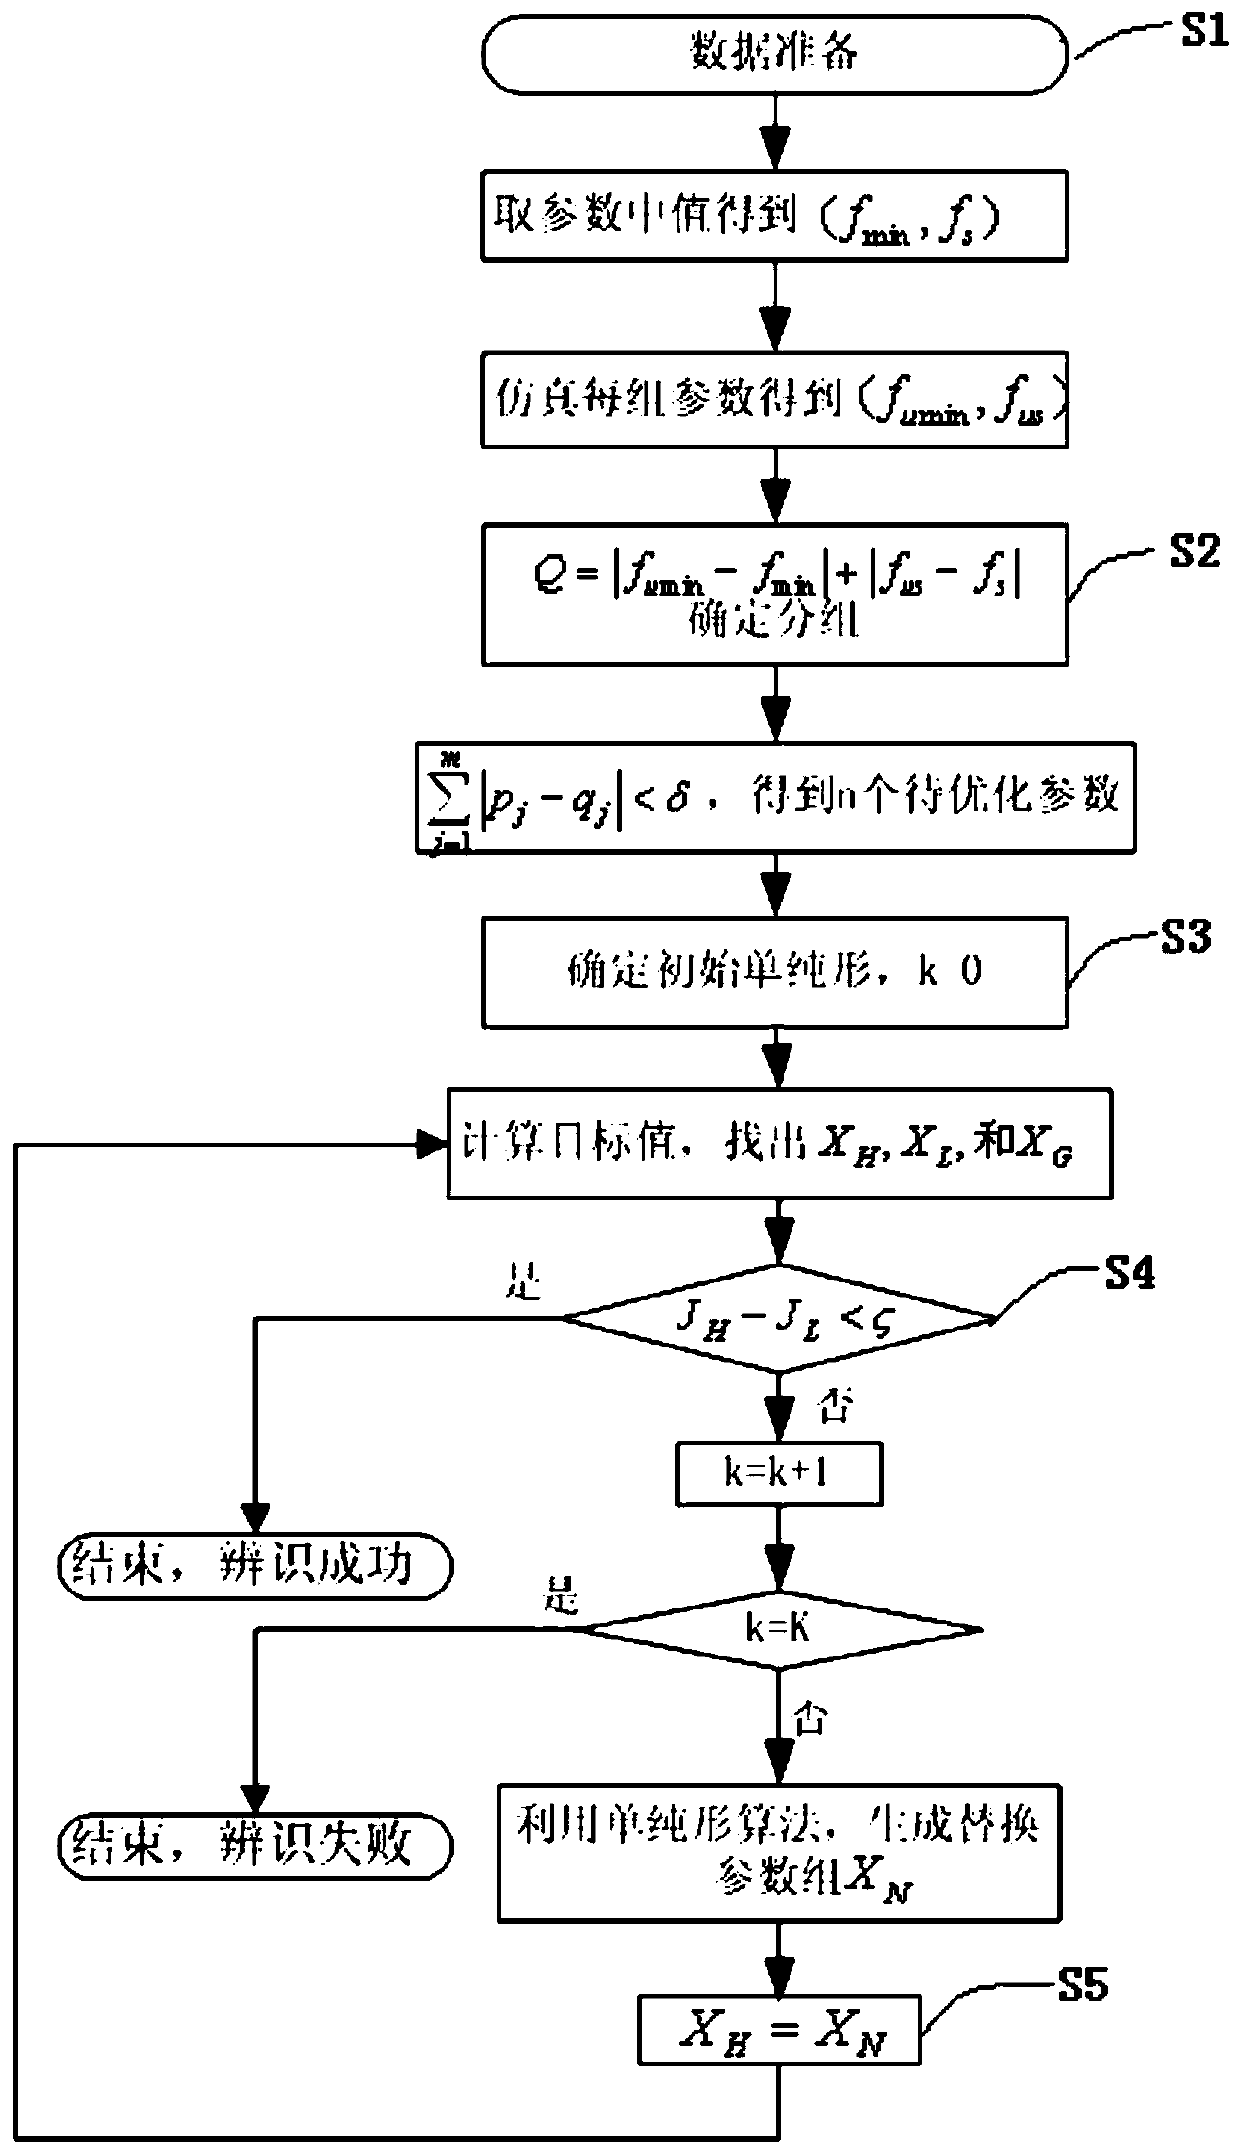 A Parameter Identification Method for Power Grid Frequency Simulation Based on Simplex Method